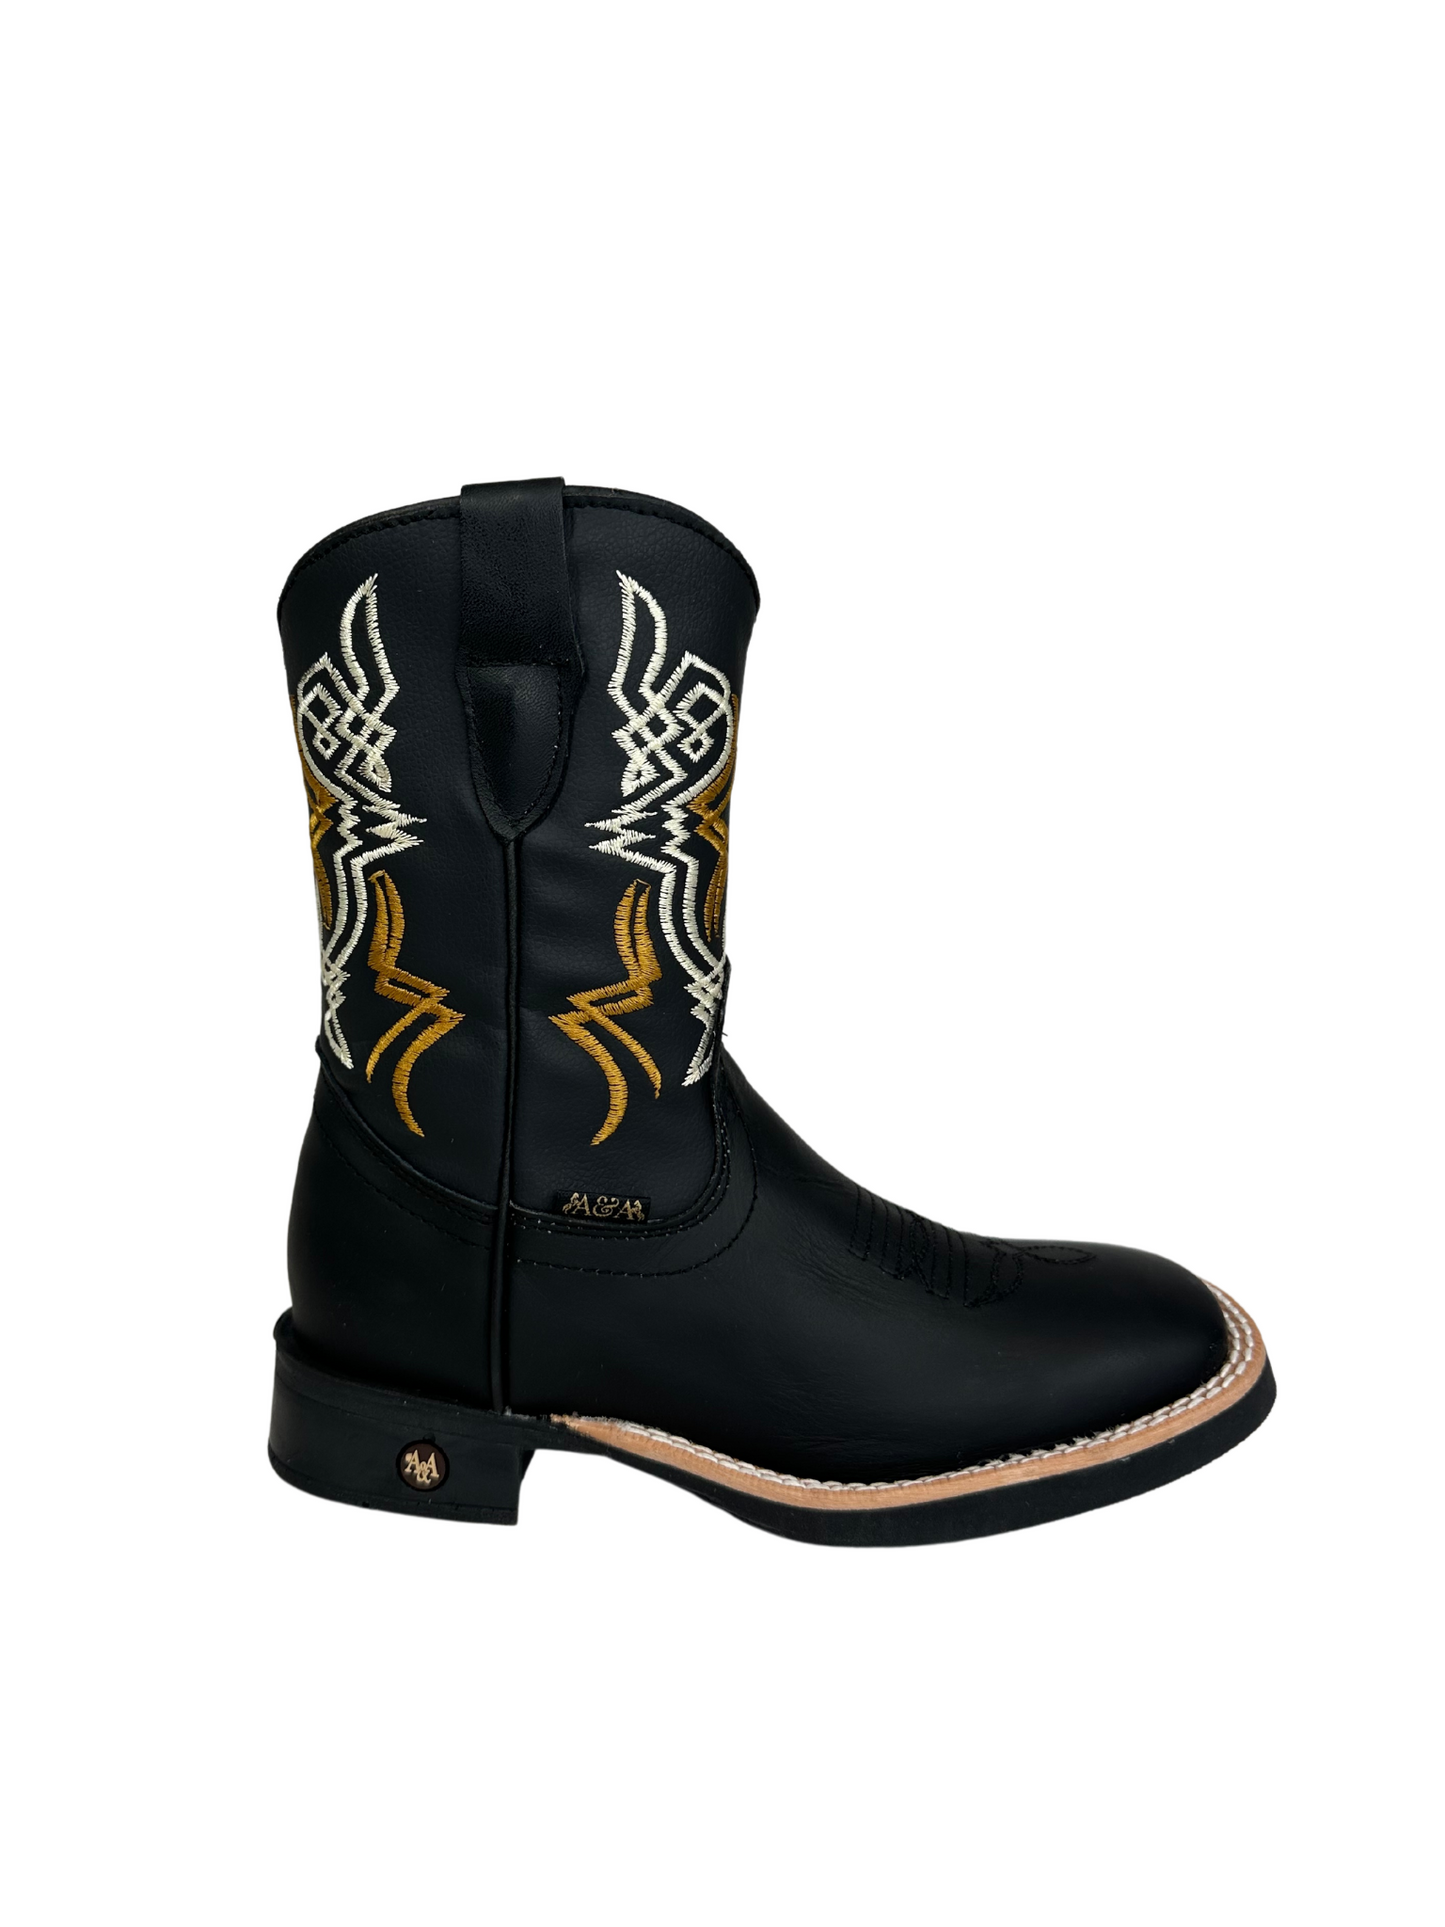 A&A Kid's Black Gold Stitched Boot